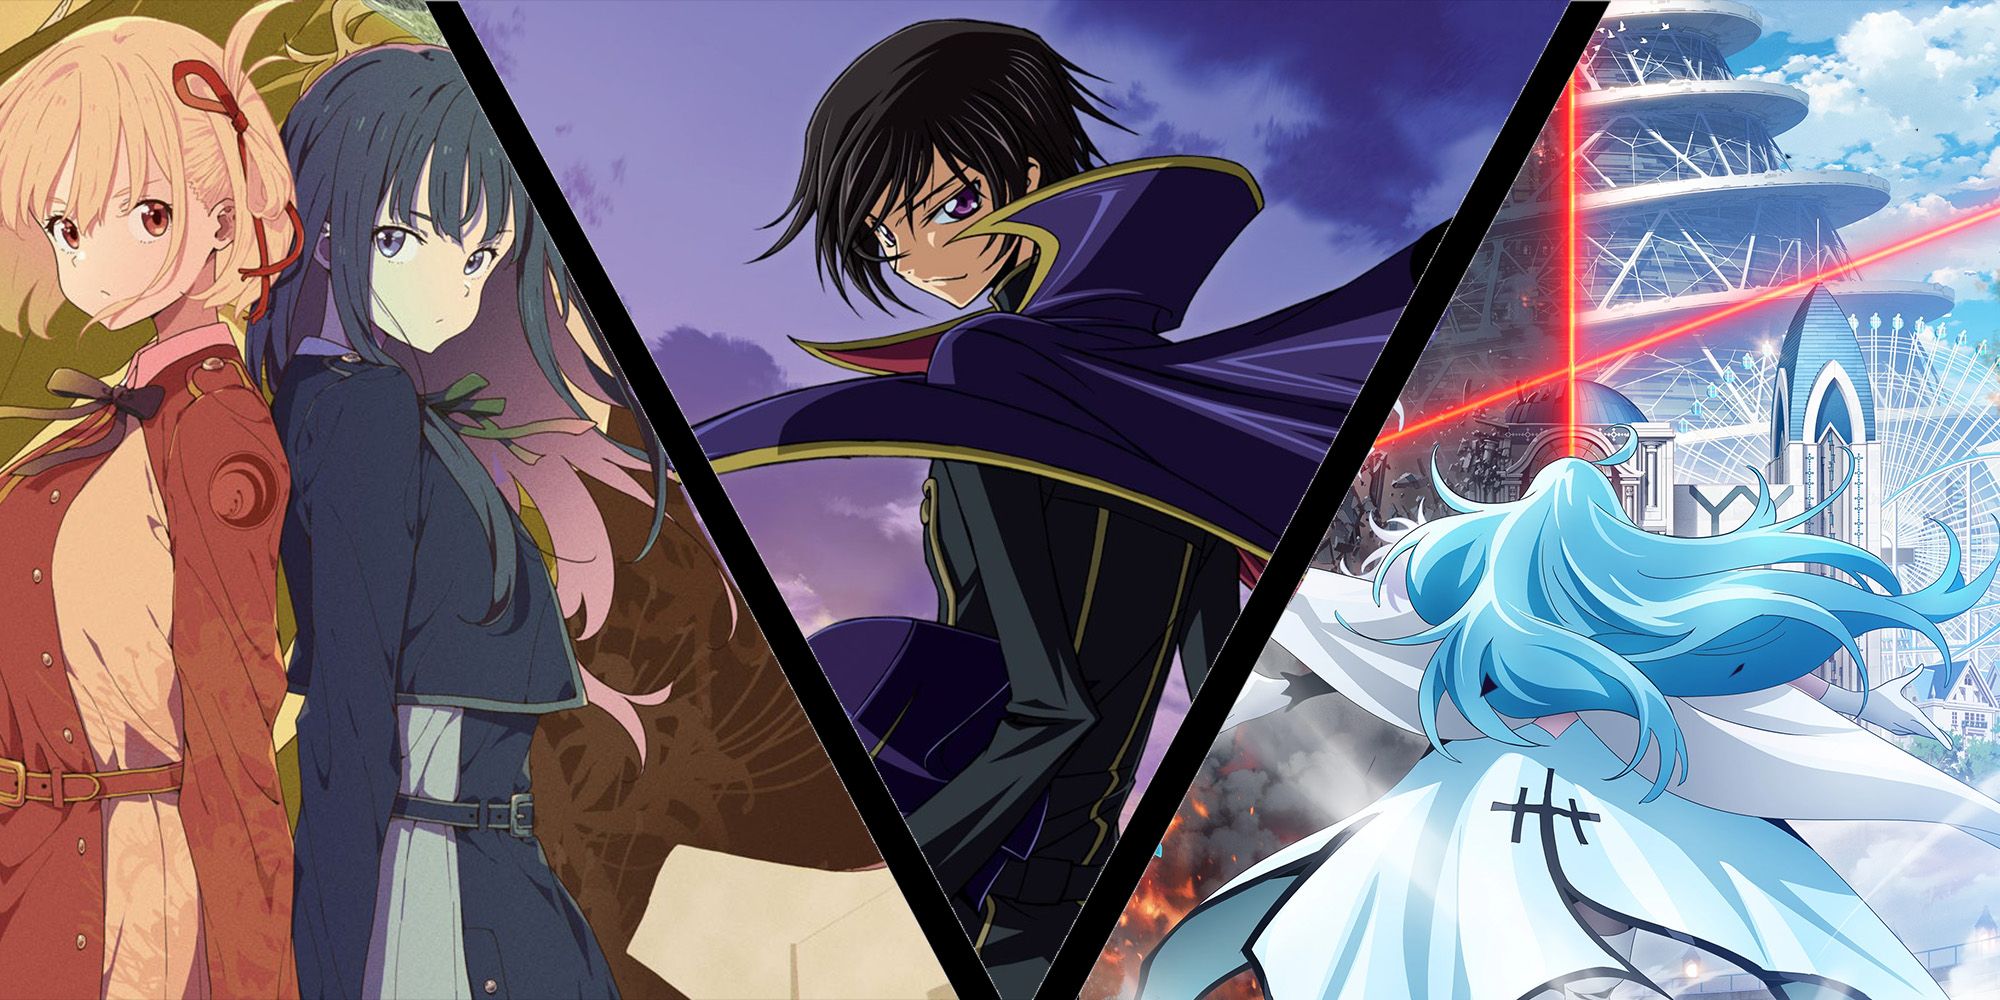 Anime split image two Lycoris Recoil characters back to back, Code Geass character looking over shoulder, and Vivy looking at city